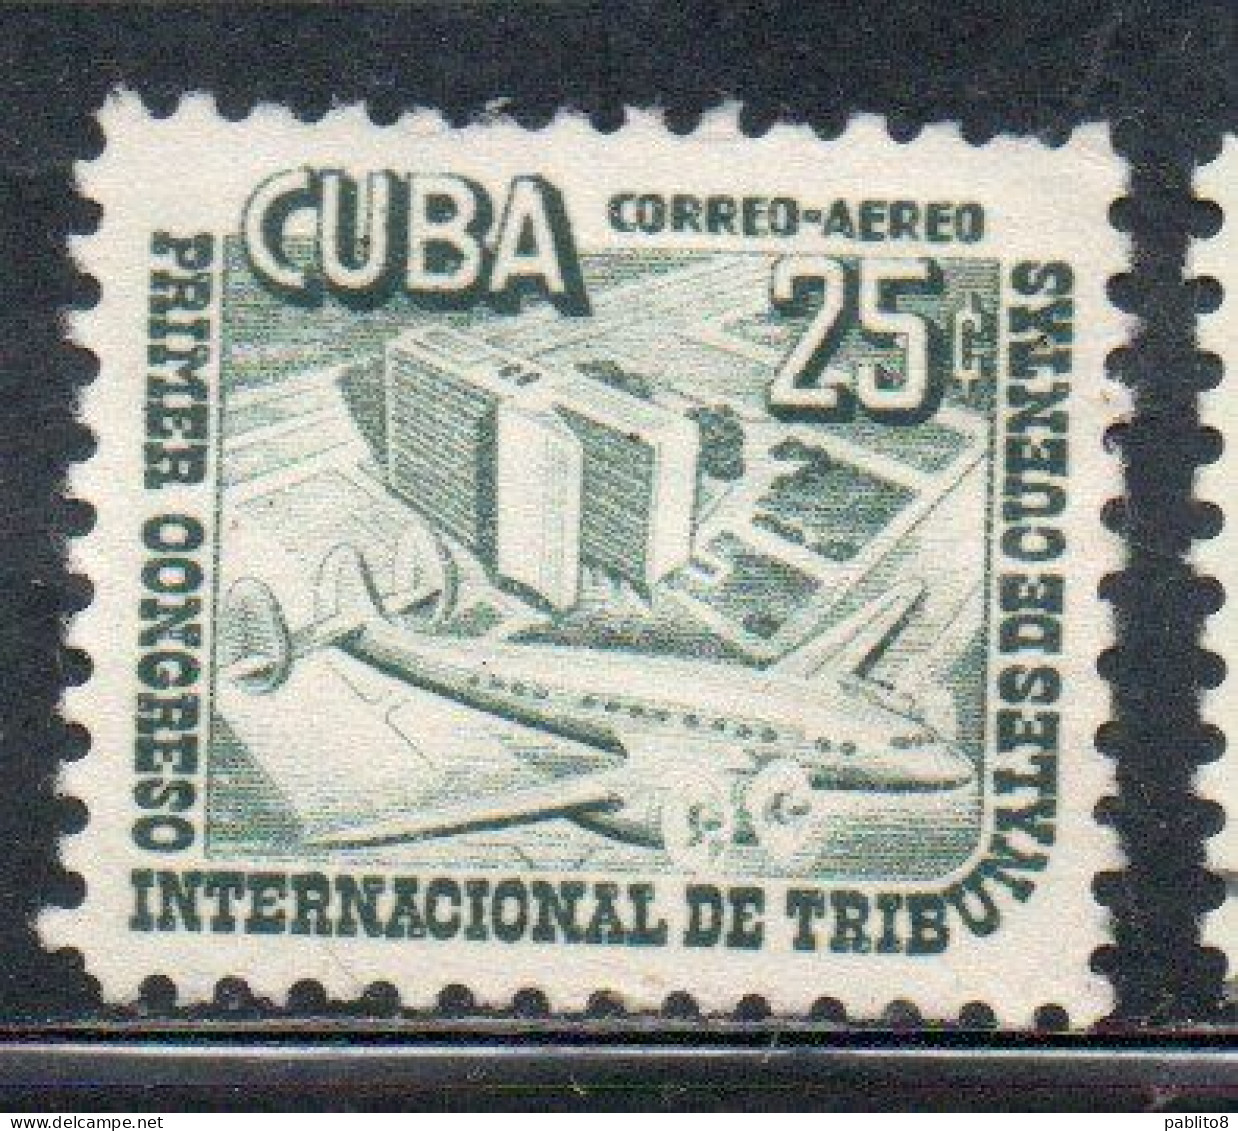 CUBA 1953 AIRMAIL AIR POST MAIL INTERNATIONAL CONGRESS OF BOARDS ACCOUNT 25c USADO USED USATO OBLITERE' - Poste Aérienne